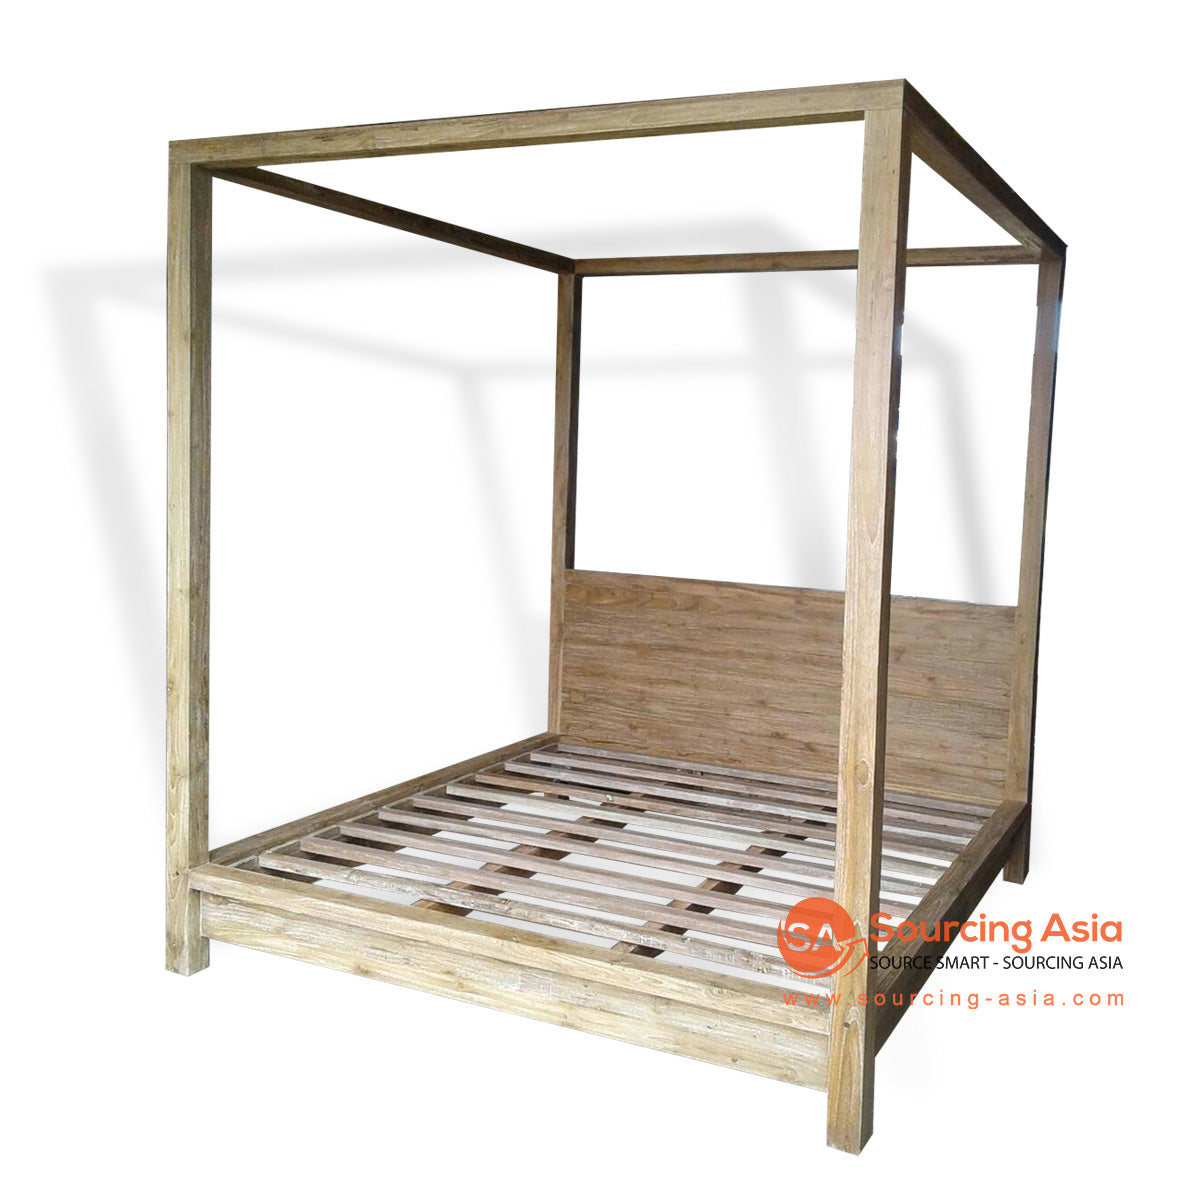 KYT90030 NATURAL RECYCLED TEAK WOOD FOUR POSTERS KING BED